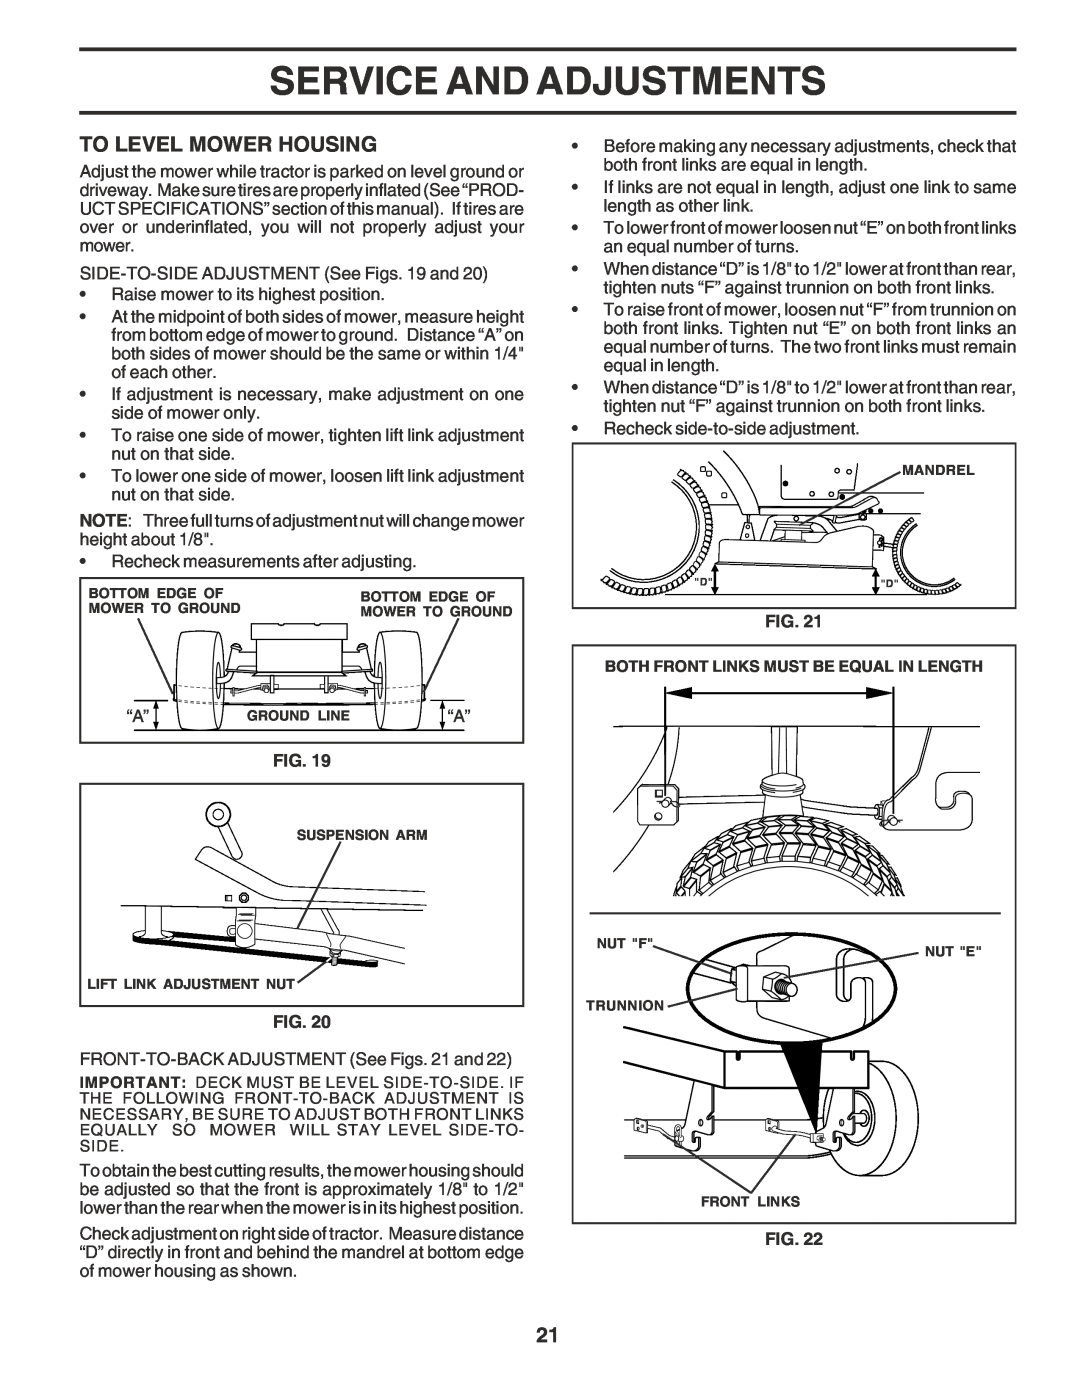 Poulan PR185H42STF owner manual To Level Mower Housing, Service And Adjustments, Both Front Links Must Be Equal In Length 